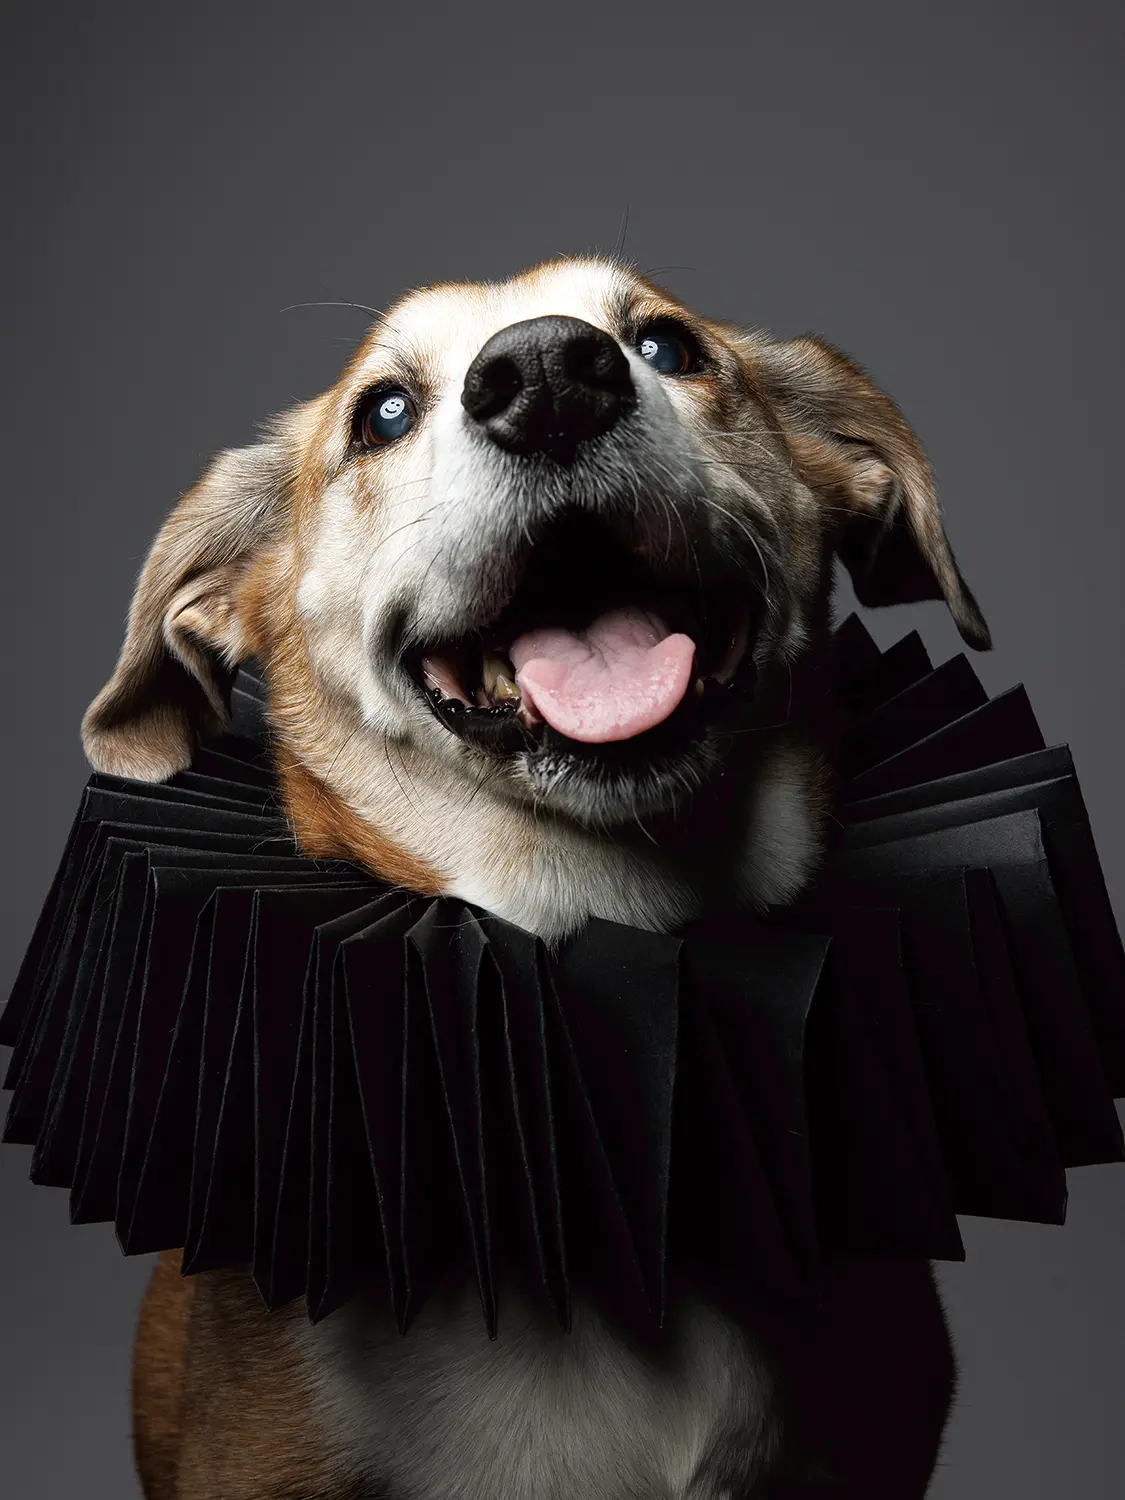 Photo of a smiling dog wearing a black ruff collar. There is a smiley face in his eyes